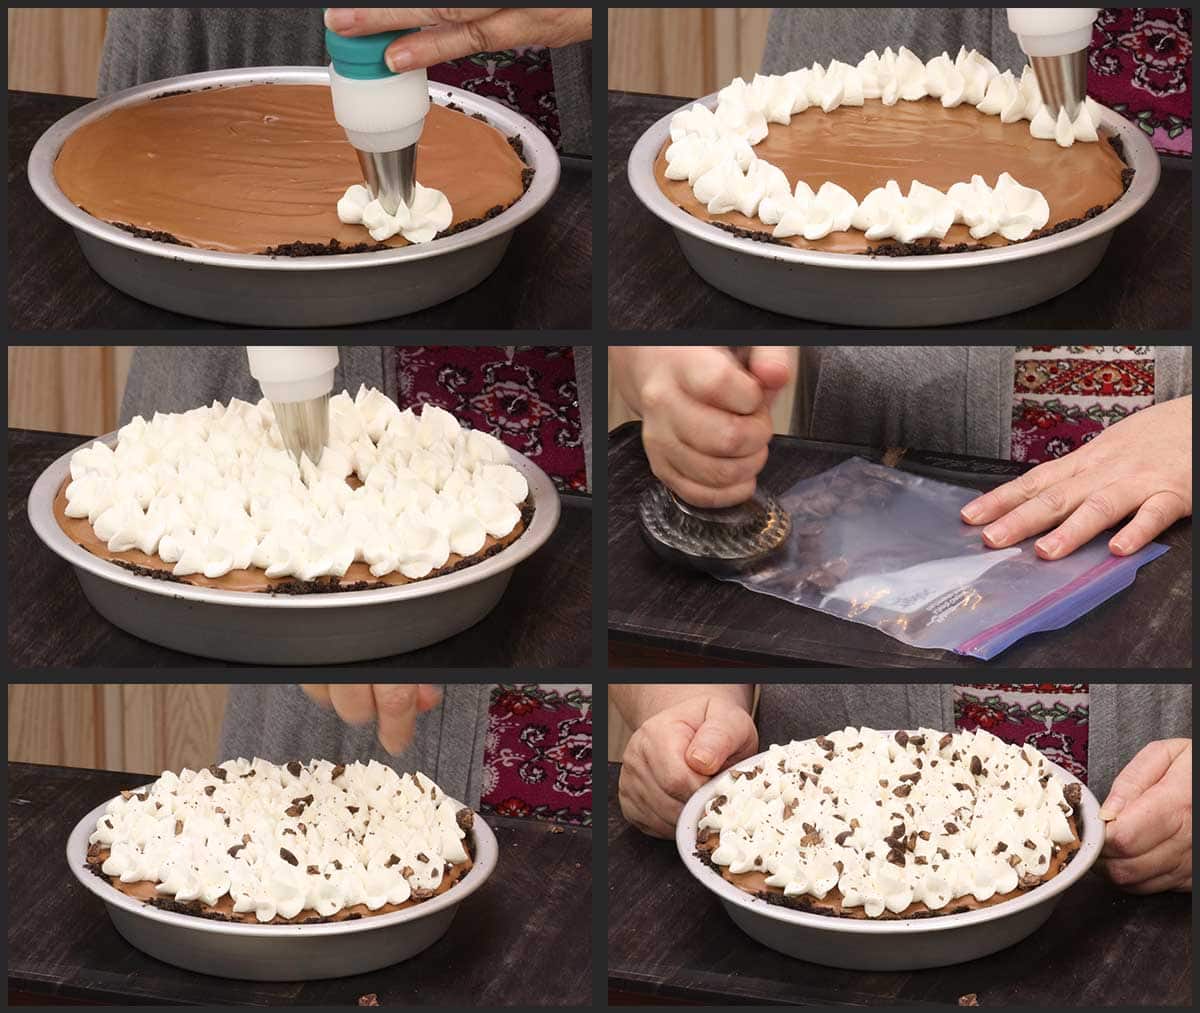 decorating the chocolate mousse pie with whipped cream and chocolate shavings.